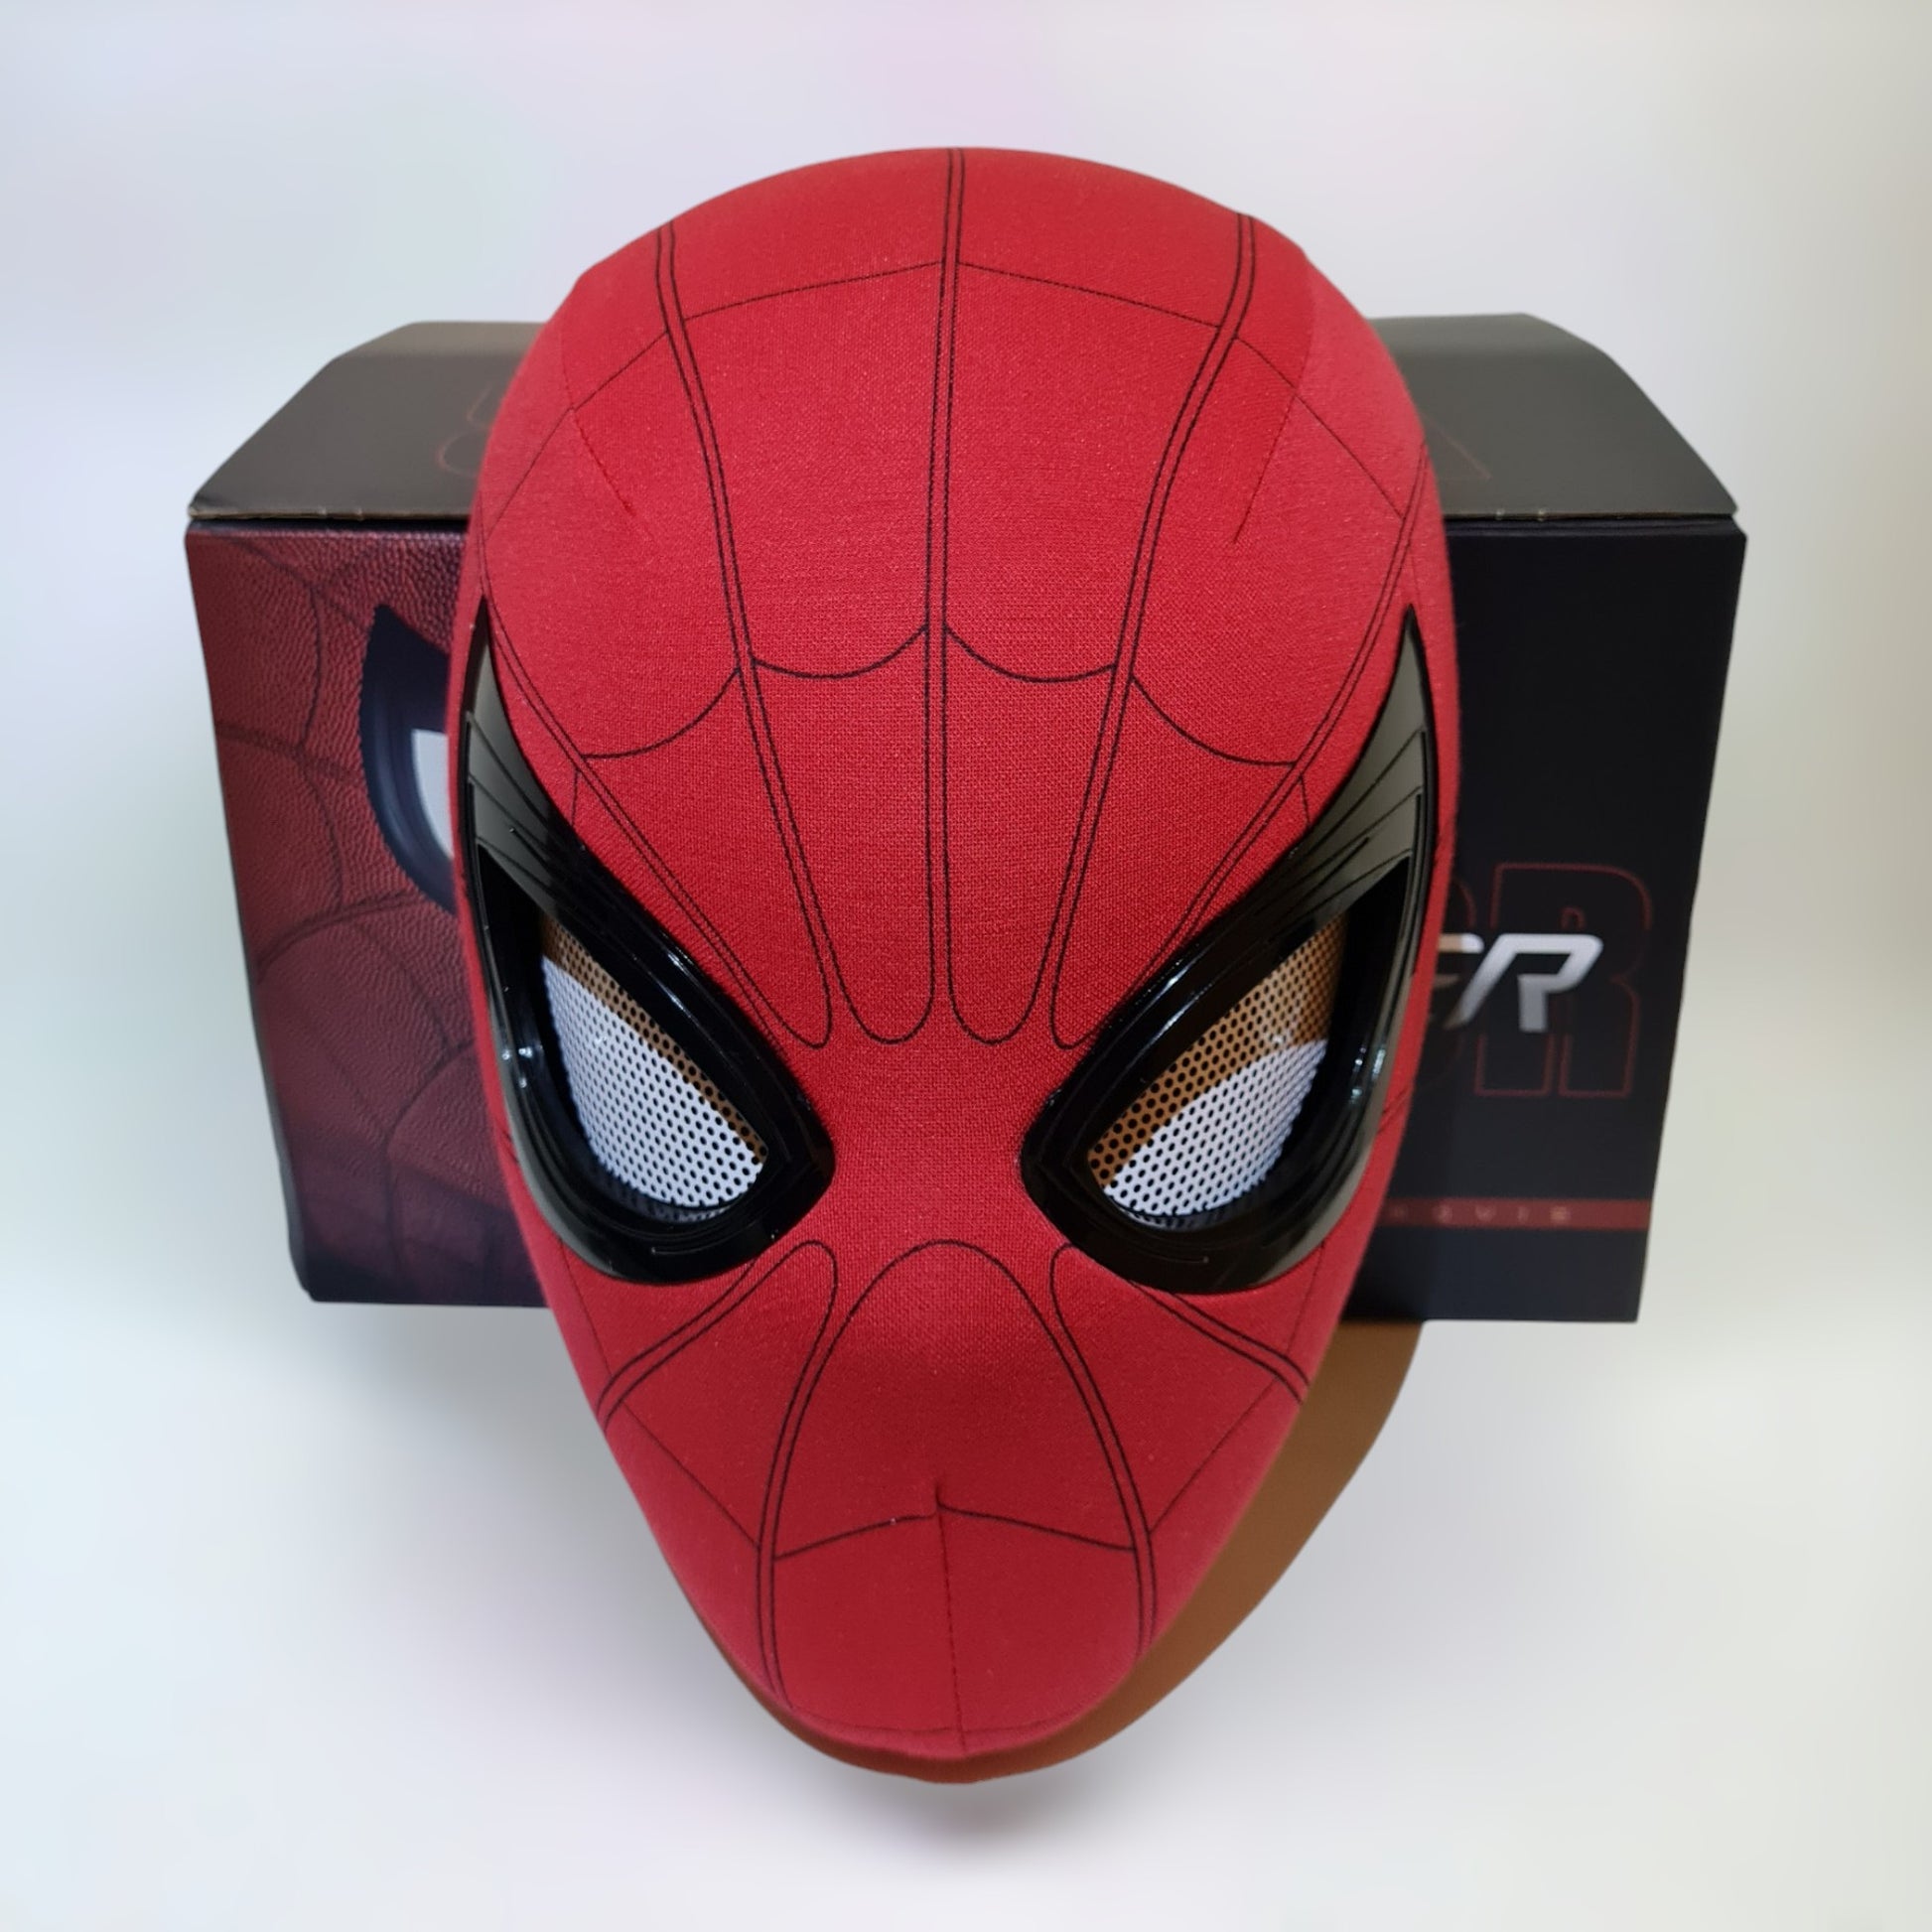 Spiderman mask blinking eyes movable remote control in front of box on a plain white background.